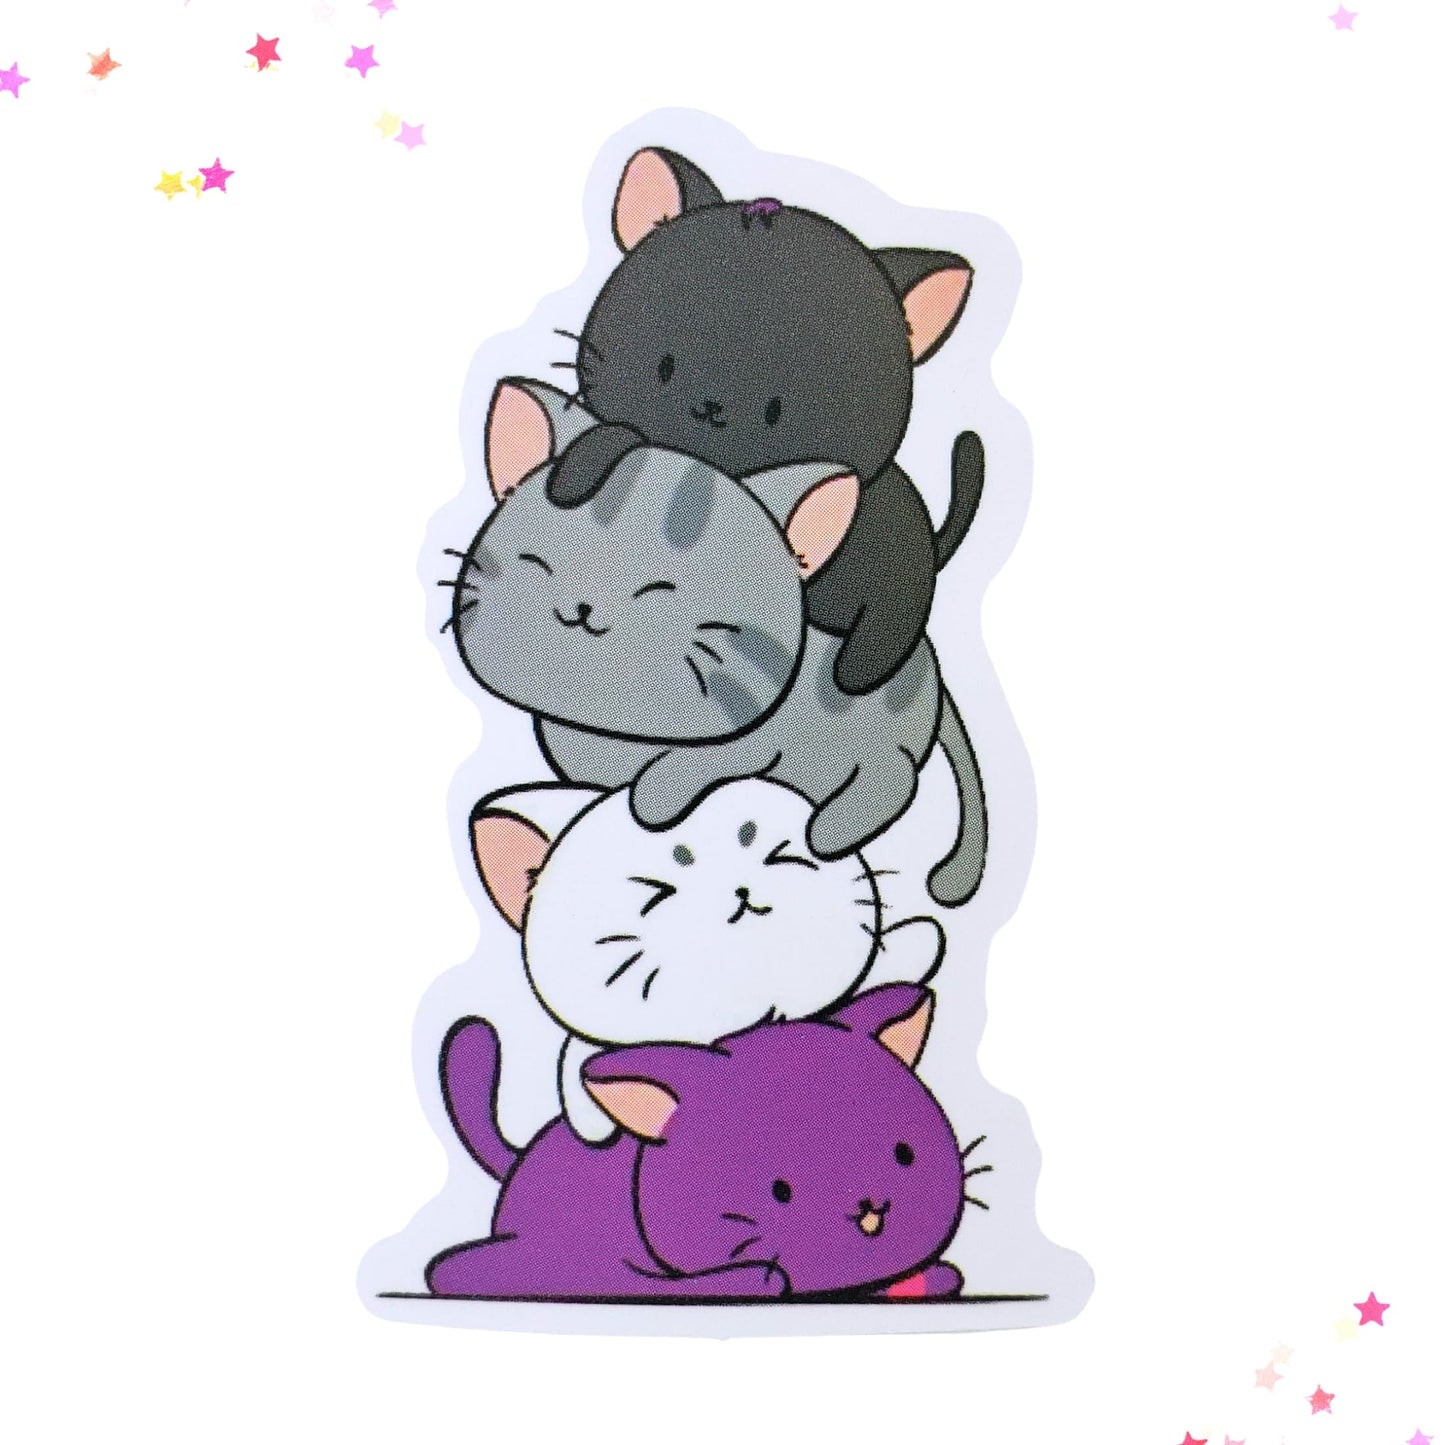 Kitty Tower Waterproof Sticker | Cat Pile from Confetti Kitty, Only 1.00